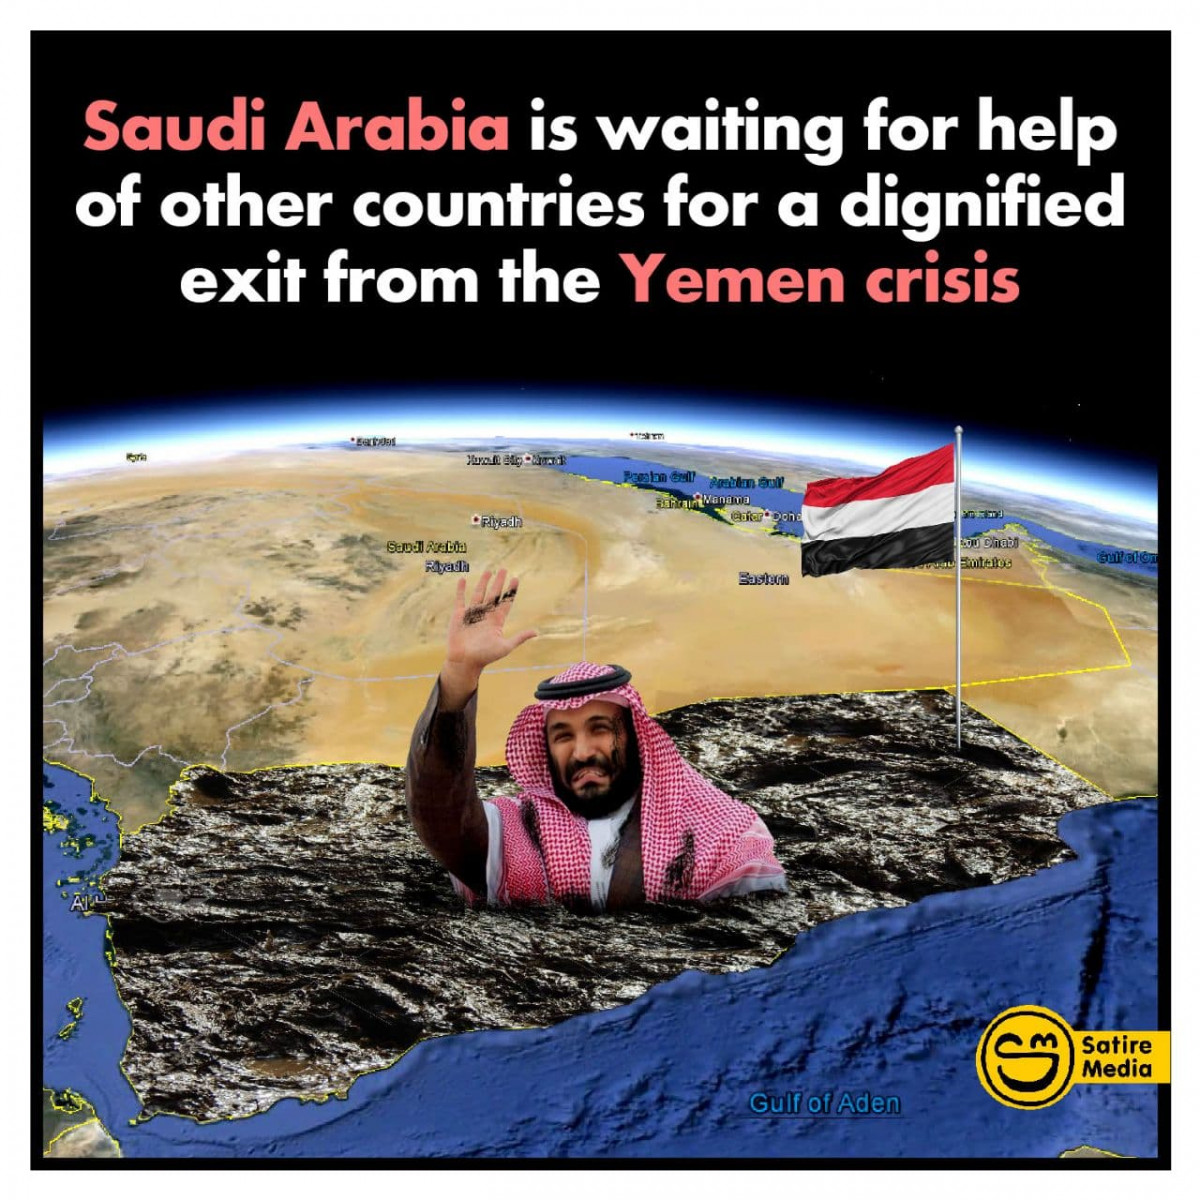 Saudi Arabia is waiting for help of other countries for a dignified exit from the Yemen crisis